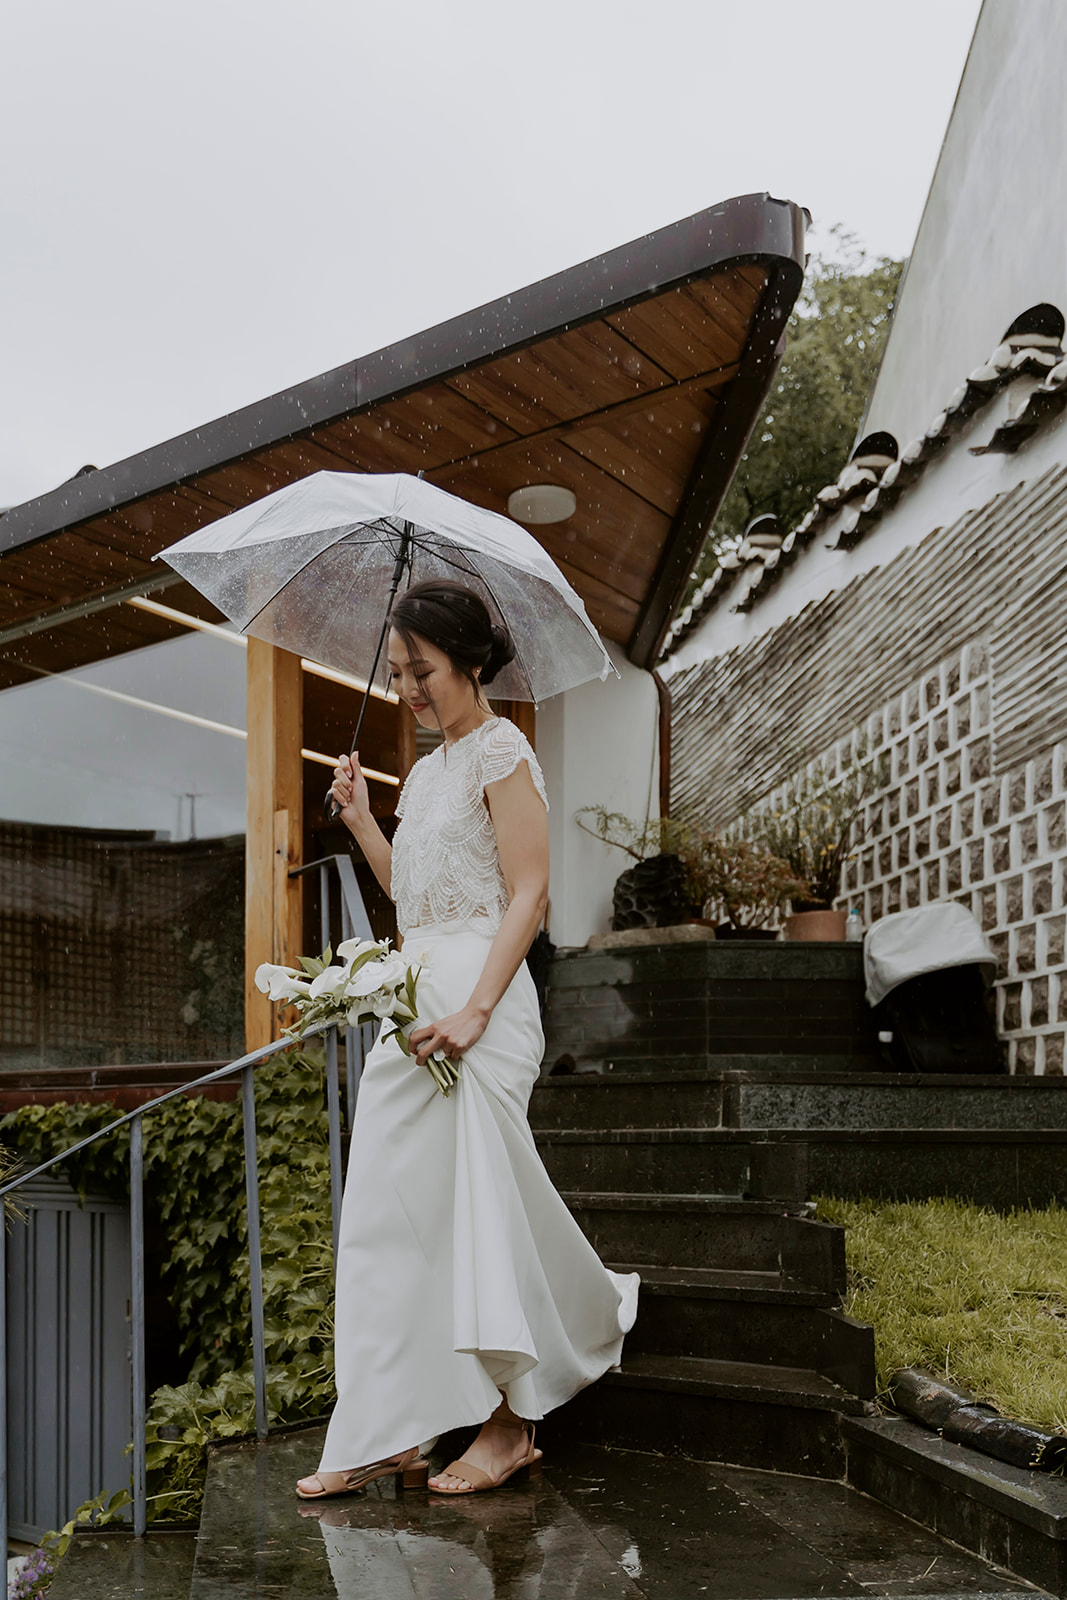 A bride in a beautiful white dress holding an umbrella for her hanok wedding.